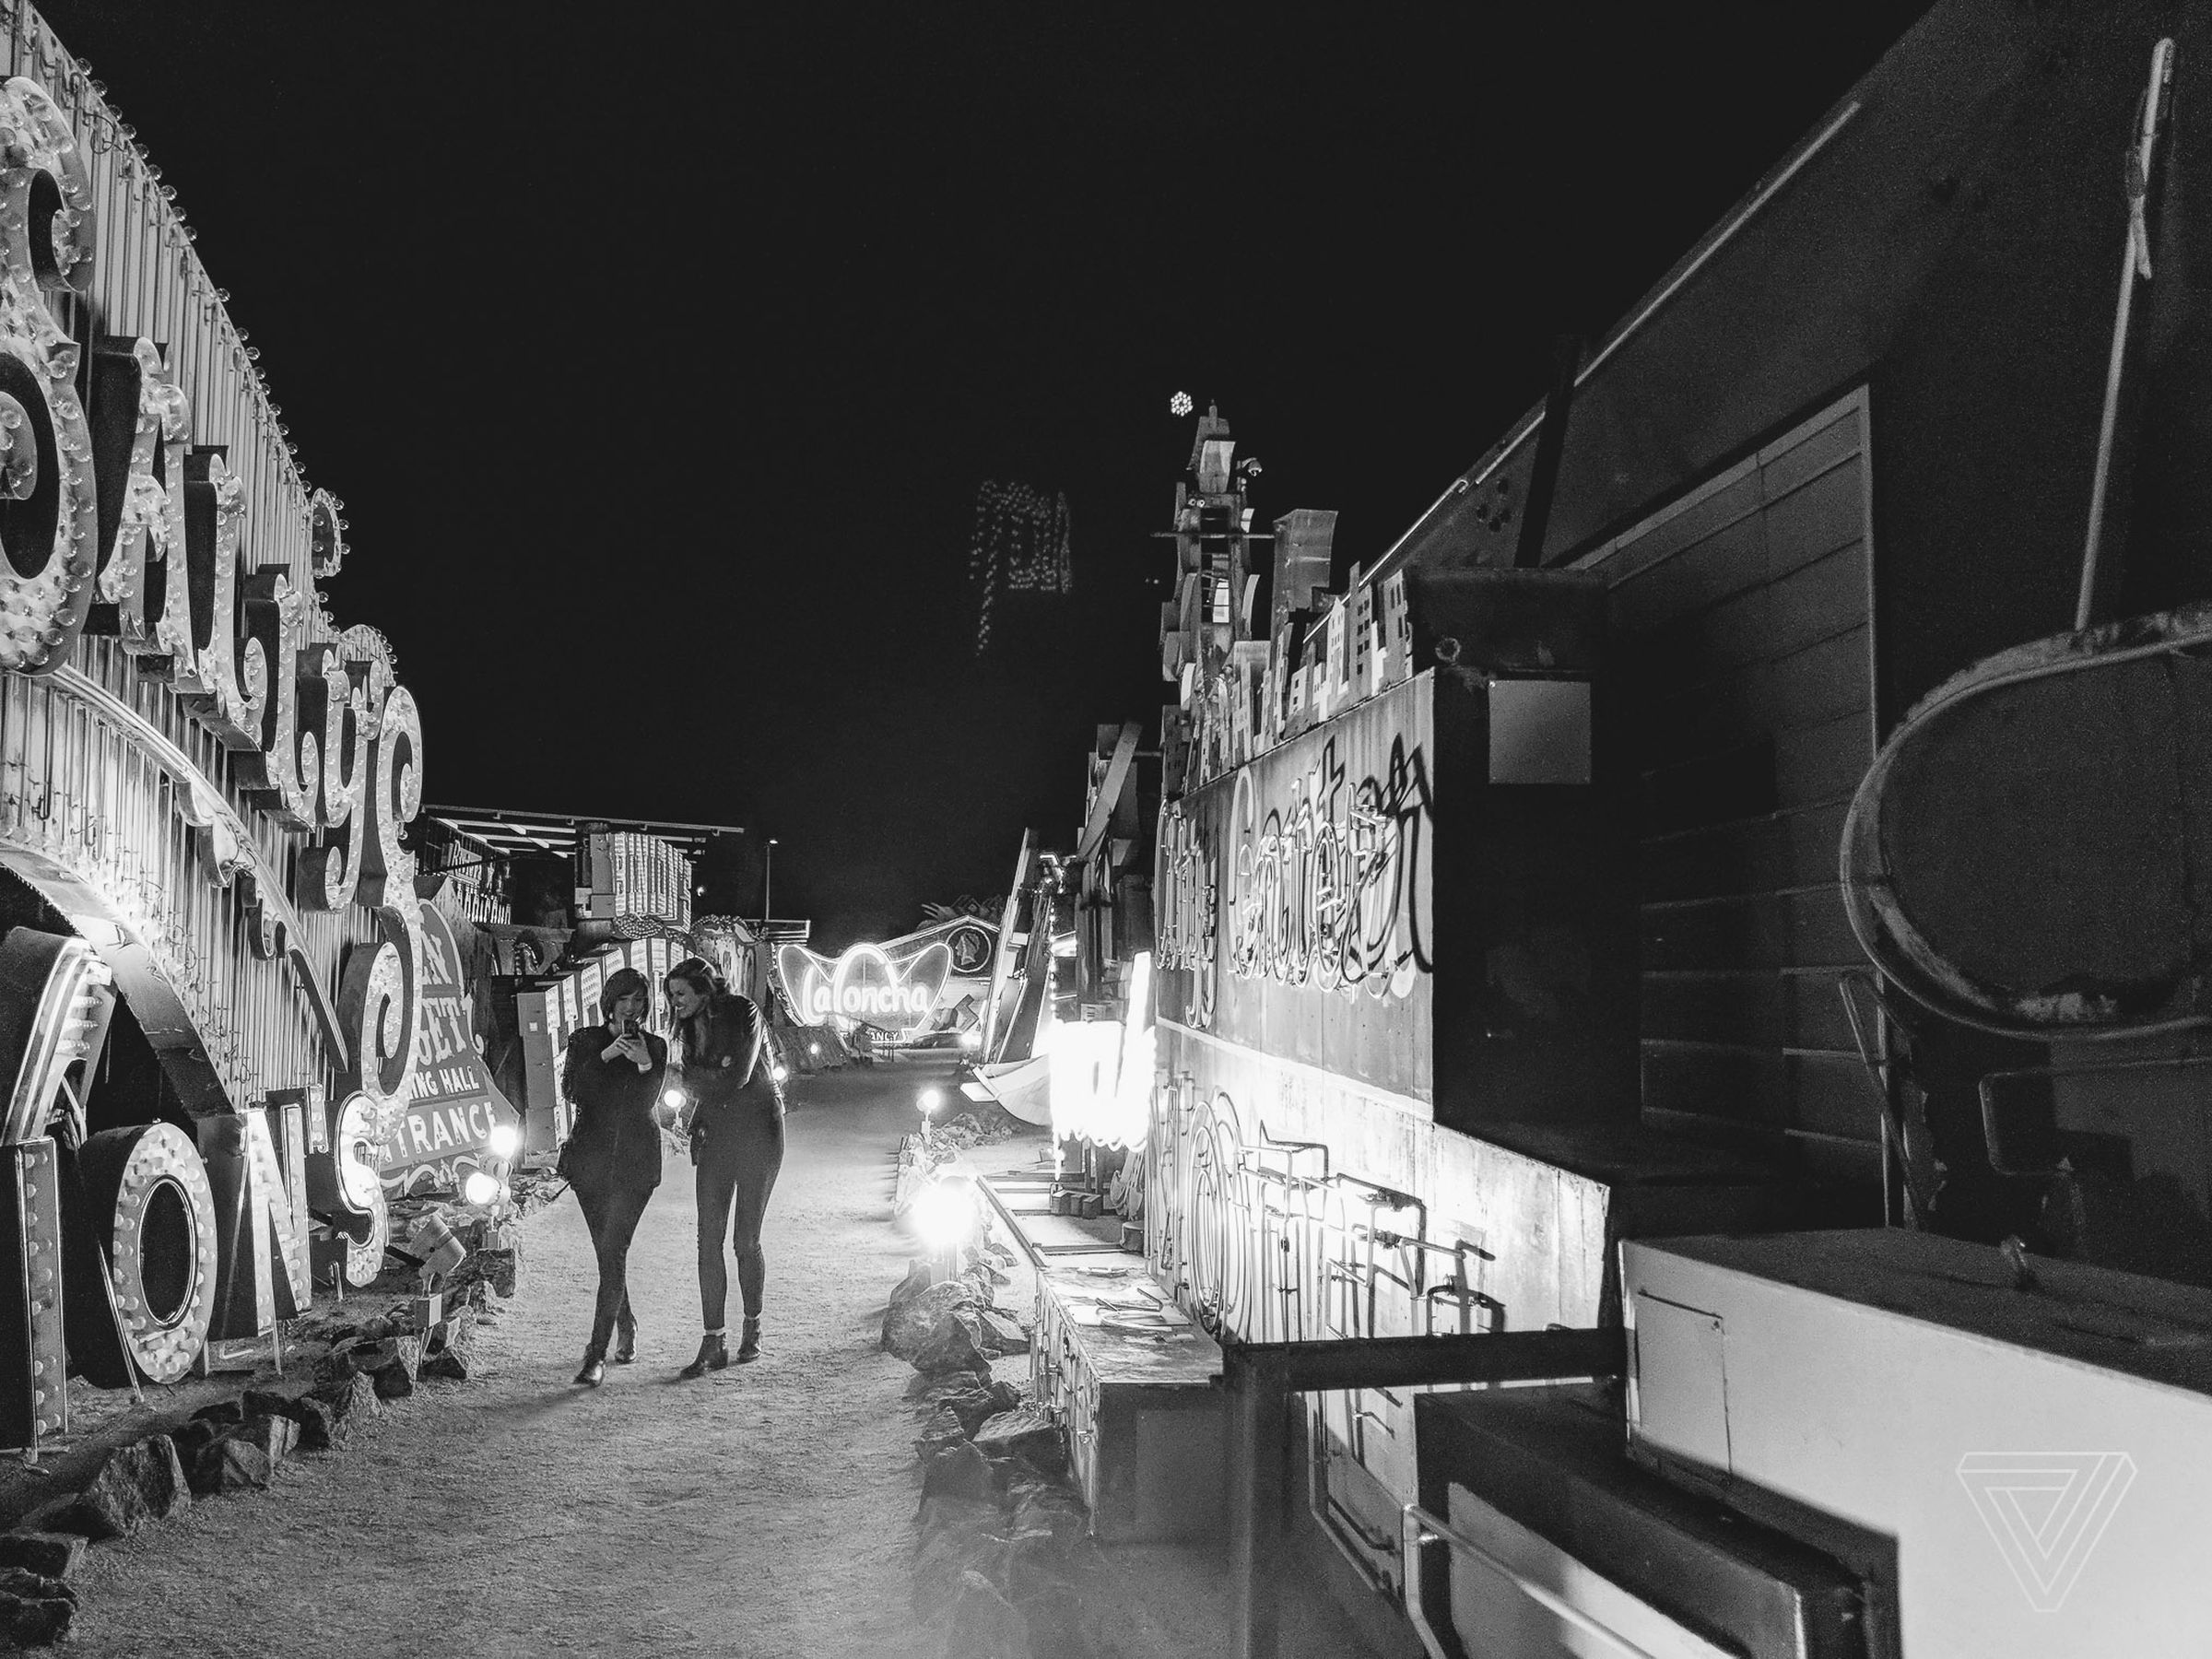 Helen Havlak and Sophie Erickson pay a dusk visit to the famous Neon Museum